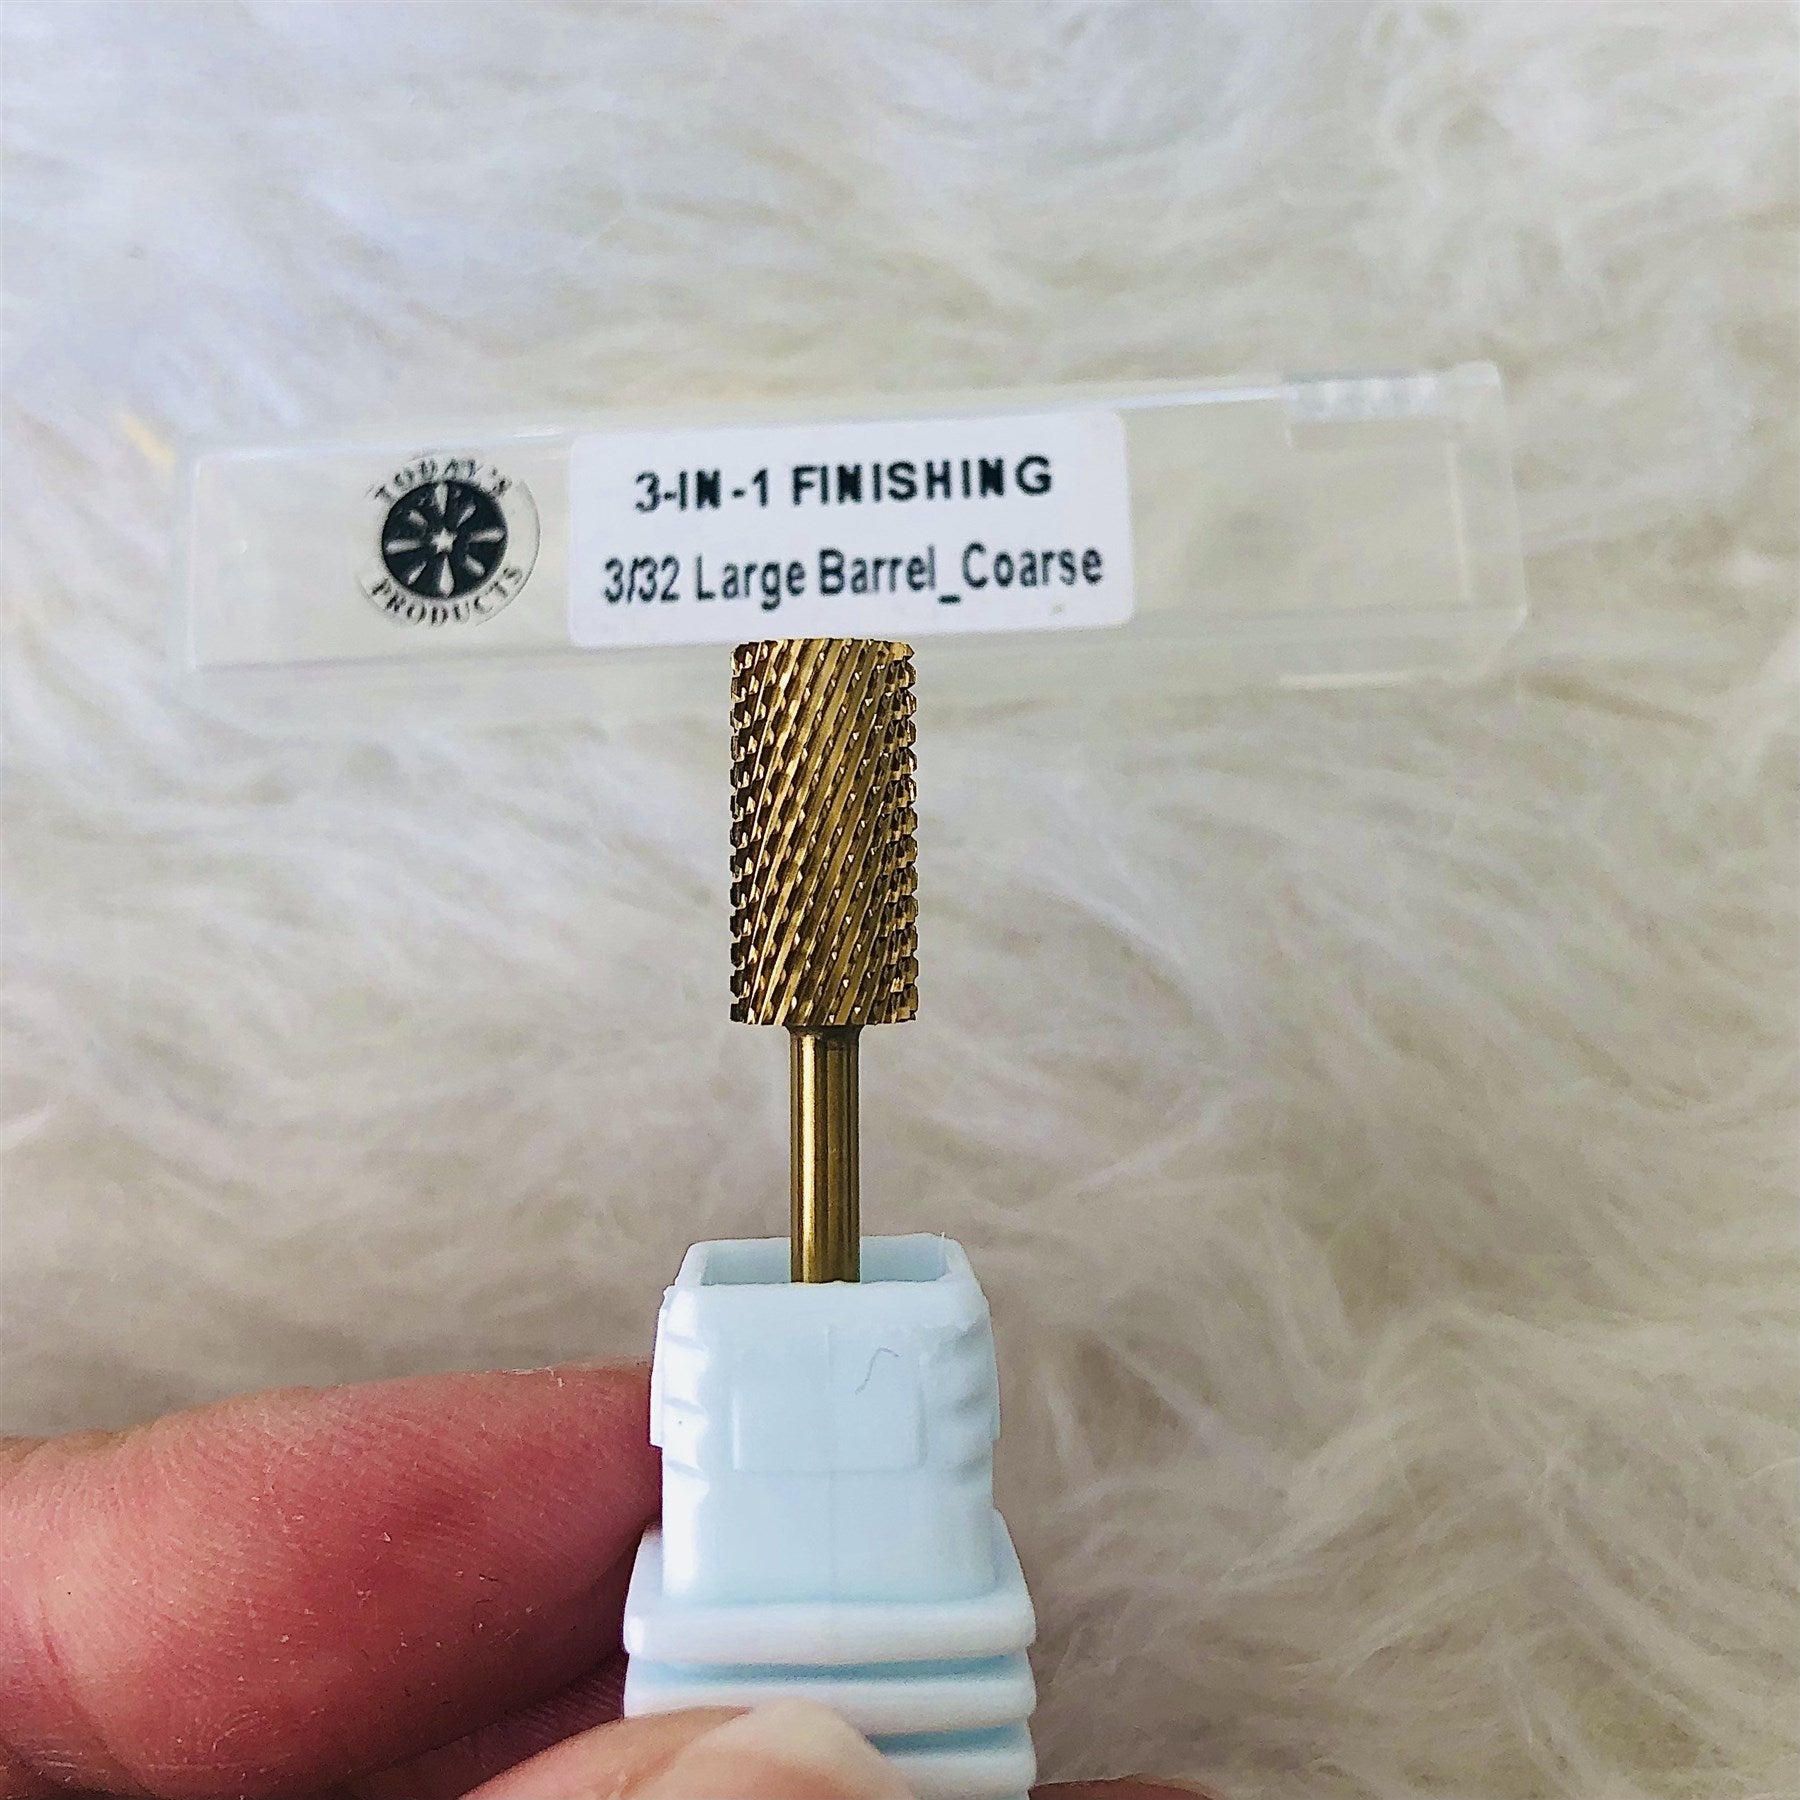 3-in-1 Finishing Drill Bits for acrylic nails, used to file uneven surface rapidly. Medium could be applied by a gentle pressure on filing surface of acrylic nails and coarse can be achieved by applying firm pressure on.